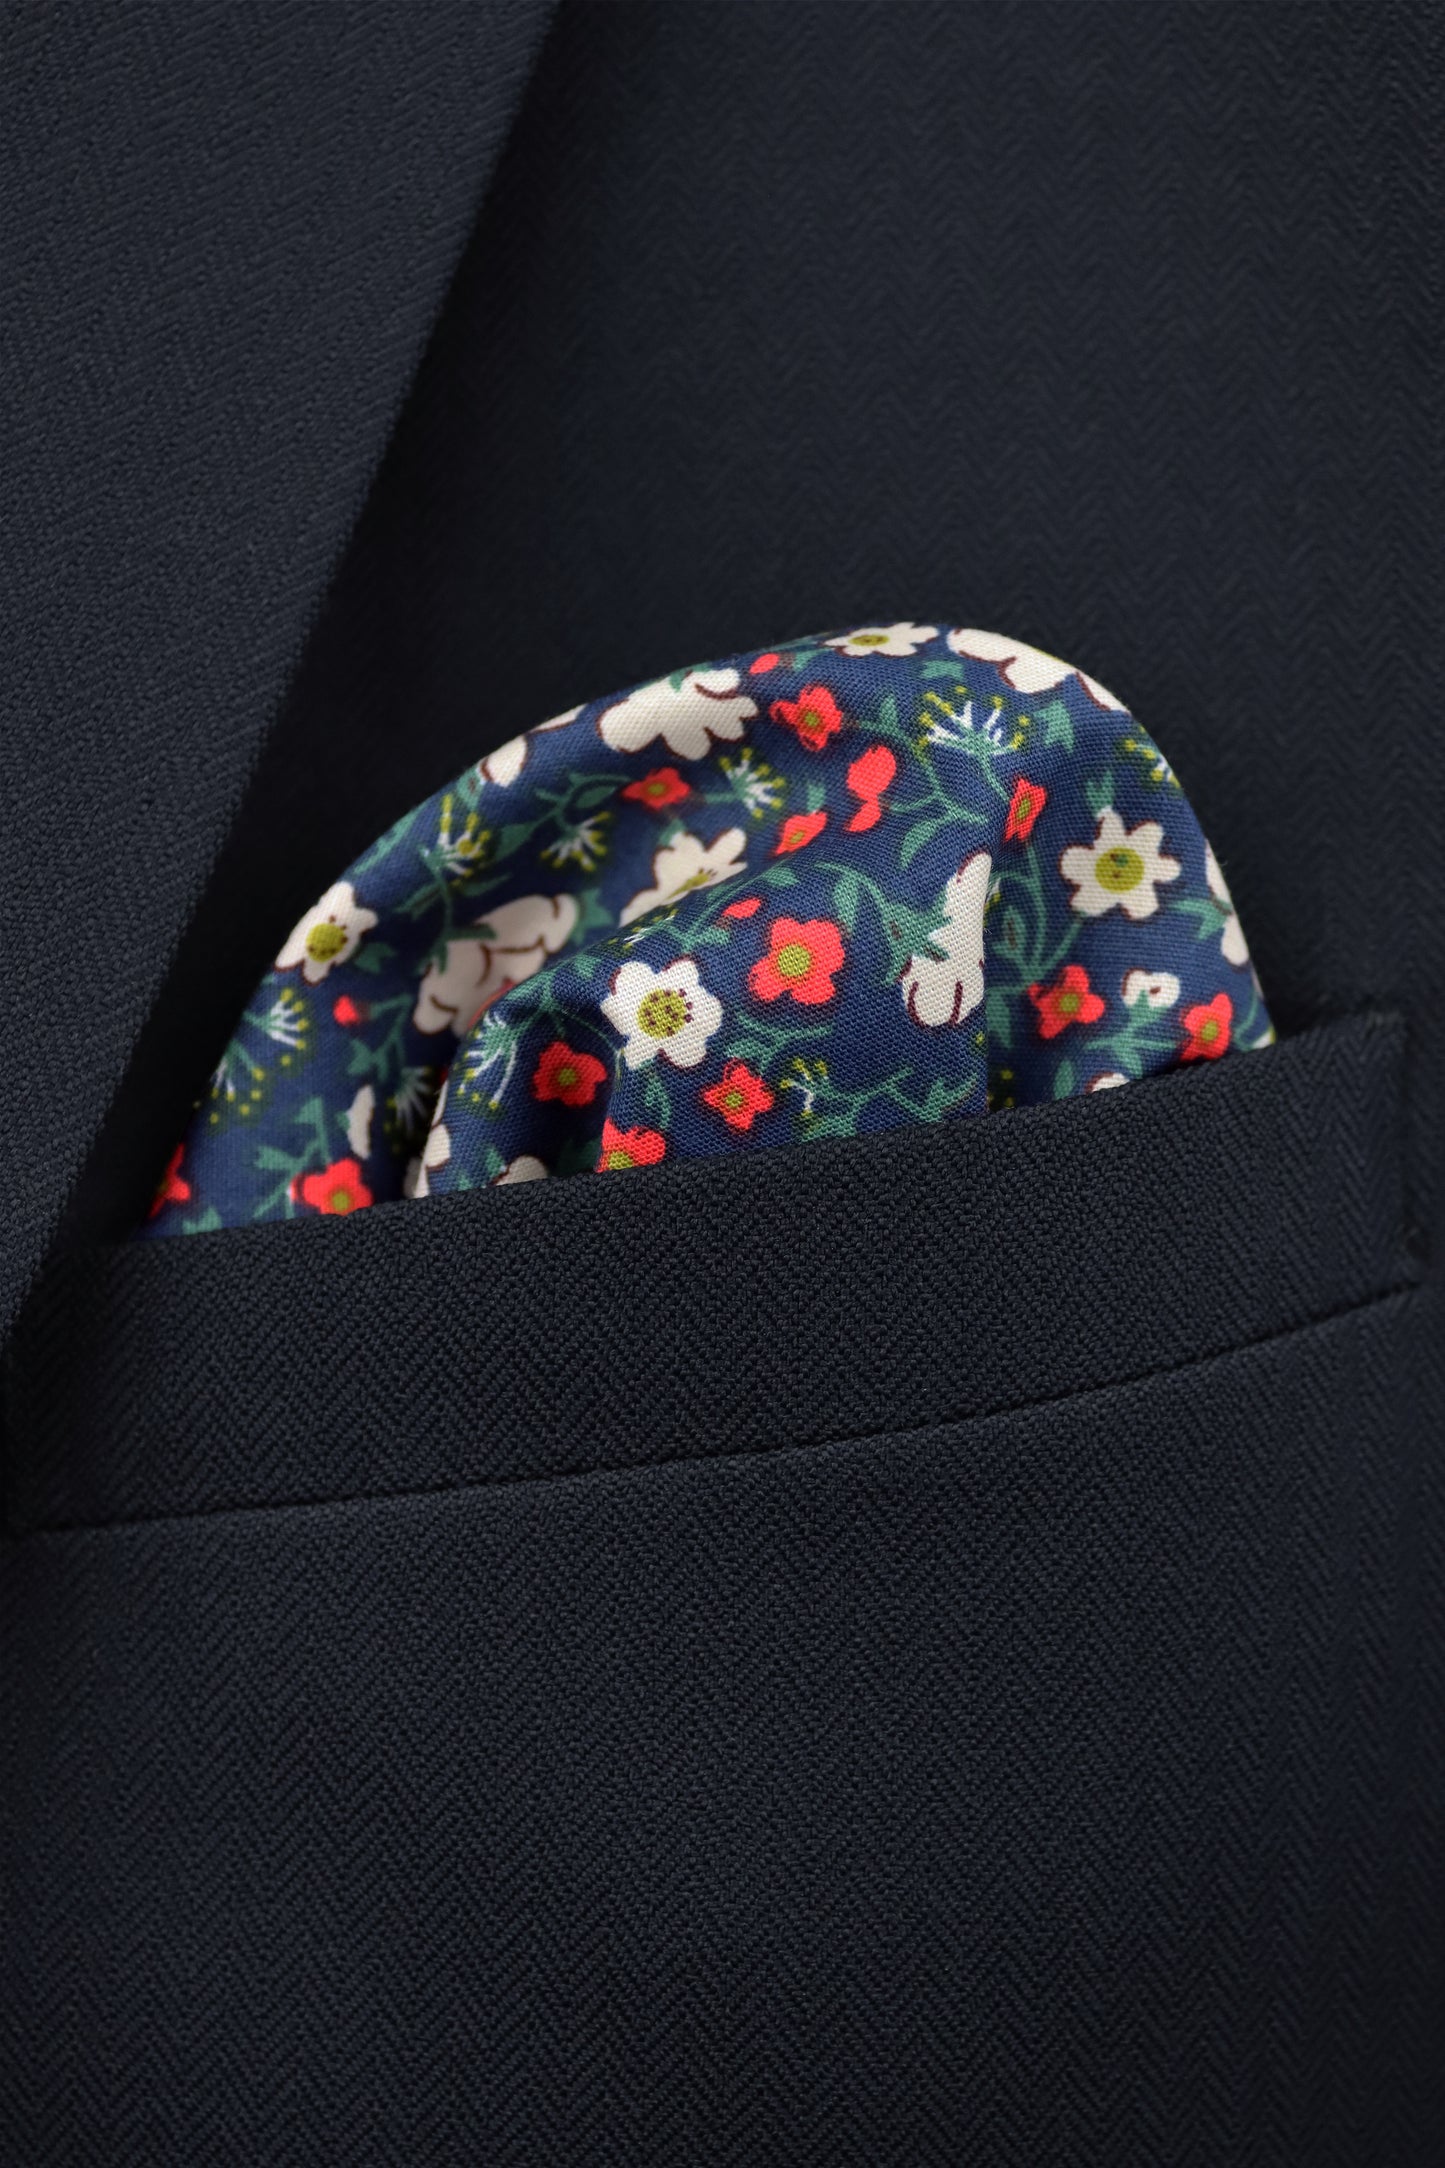 100% Cotton Floral Print Tie - Navy Blue, White & Red